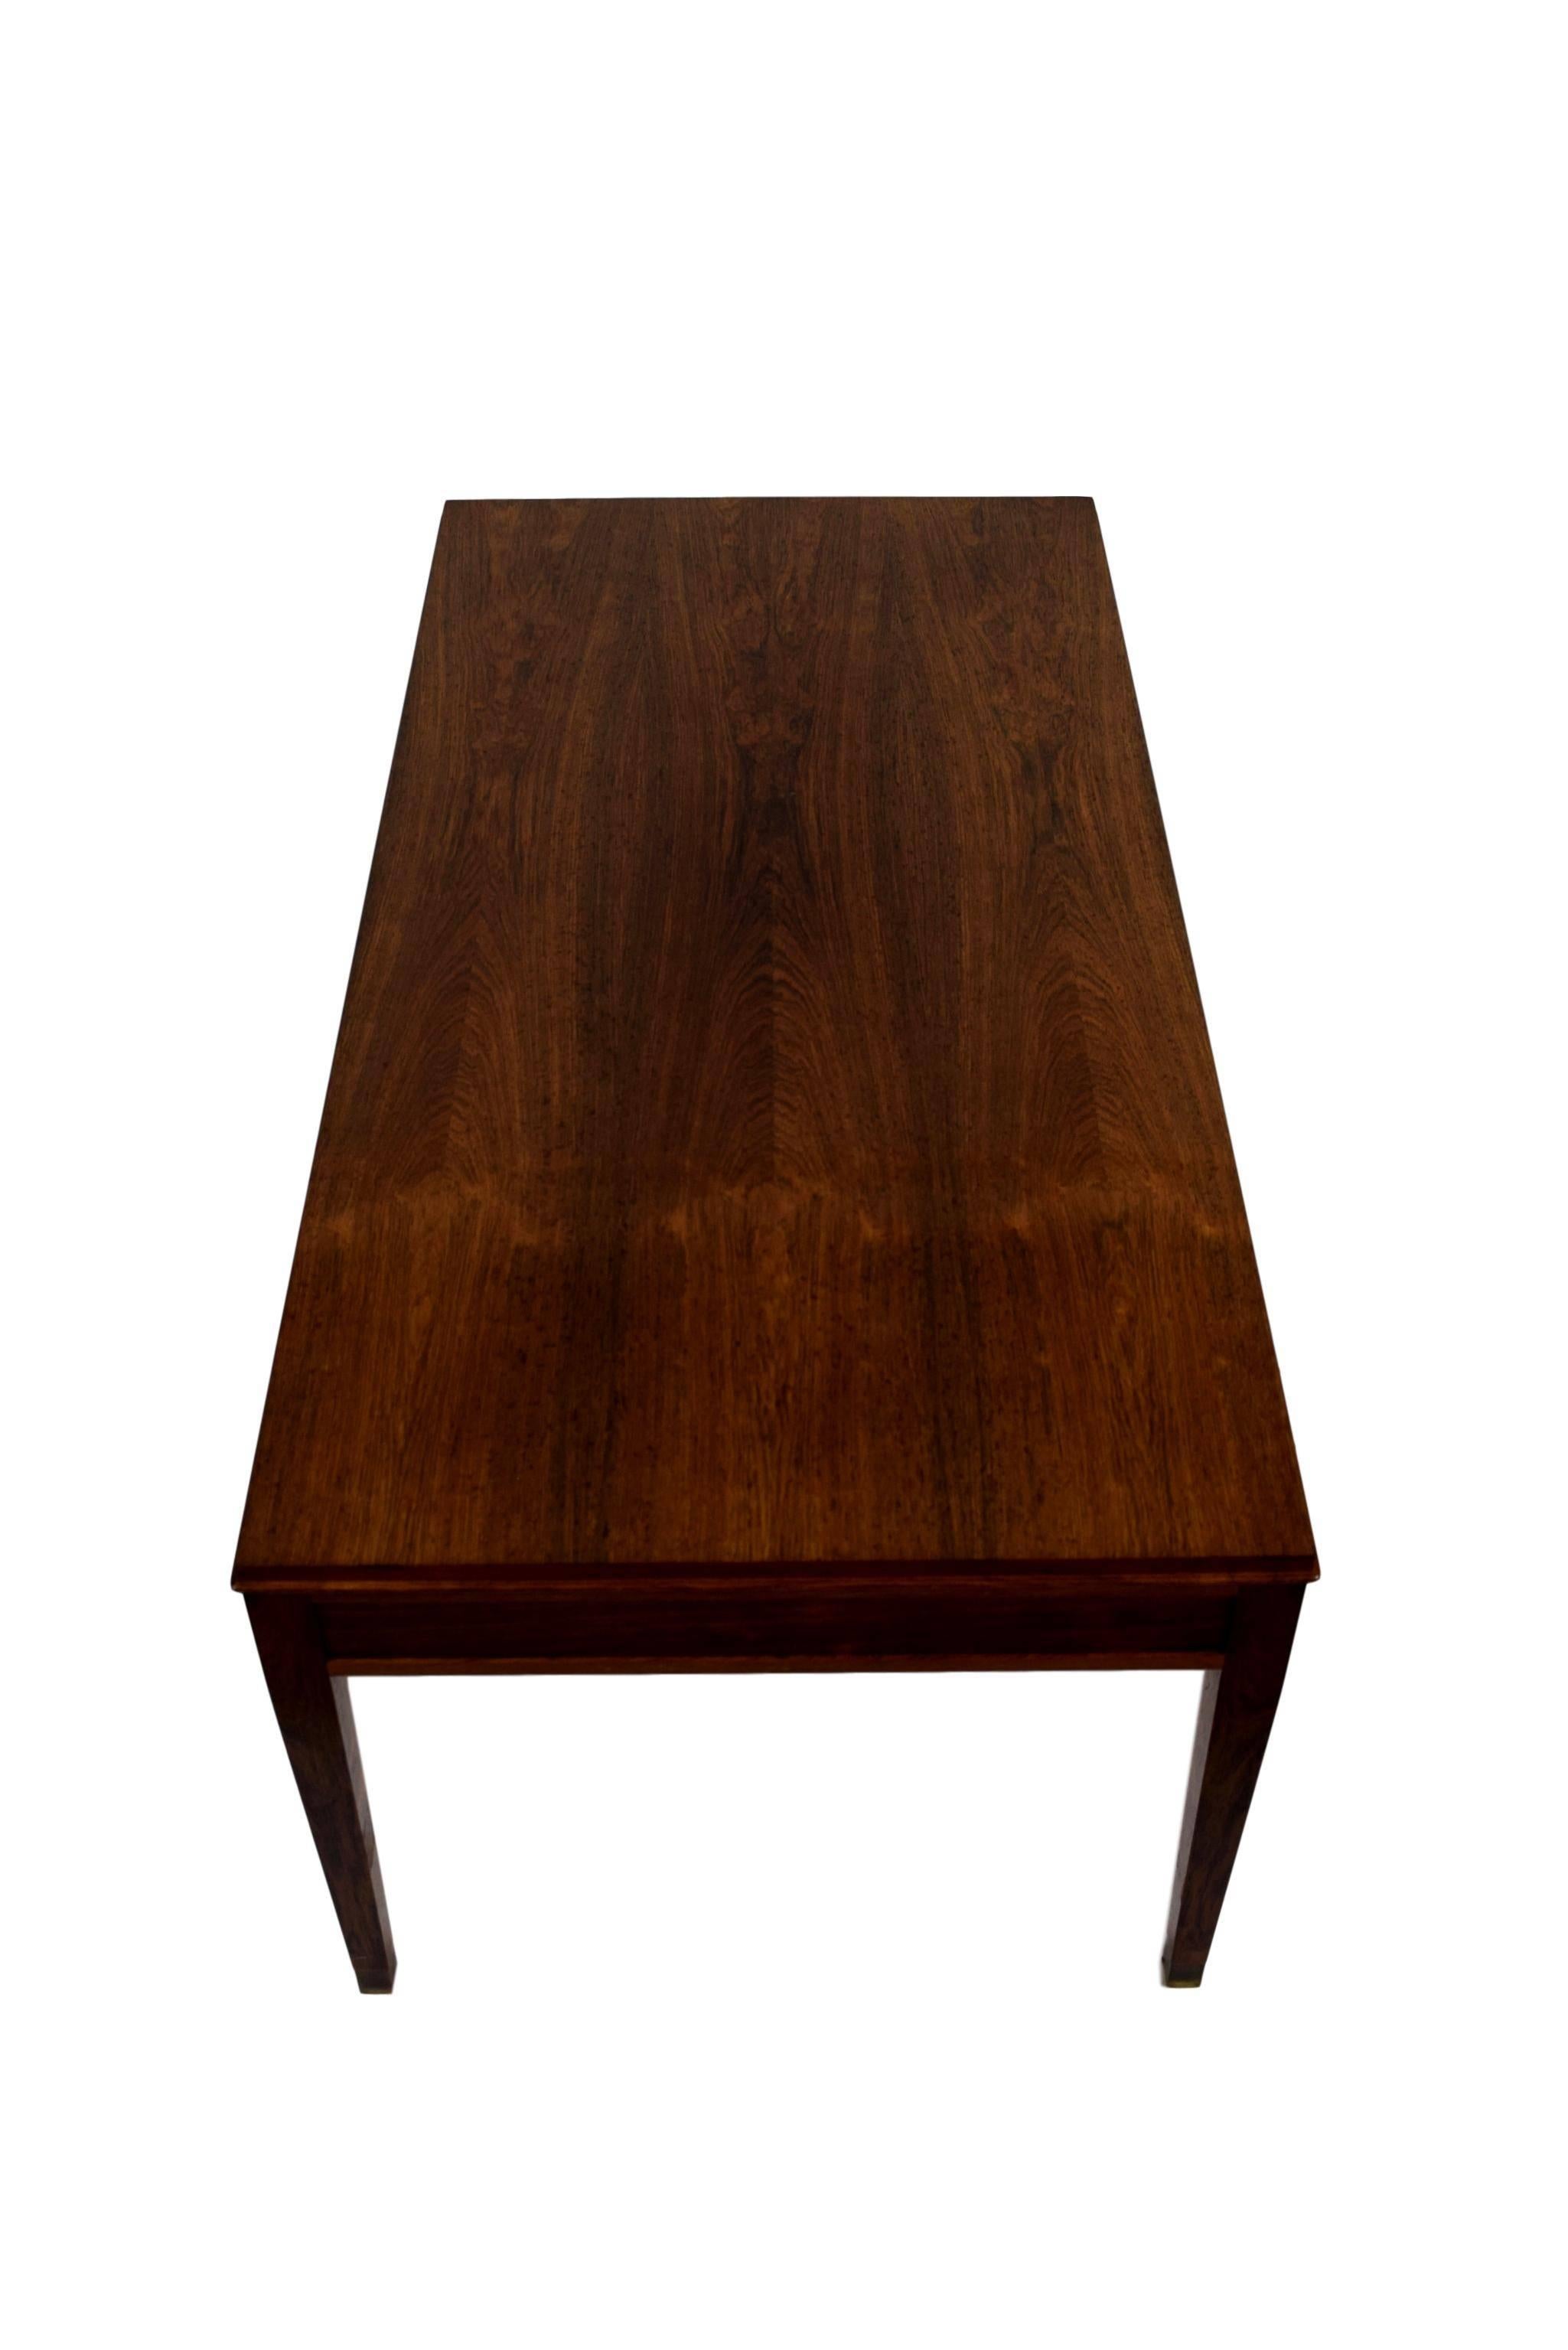 Rosewood Danish Midcentury Coffee Table by Frits Henningsen, Four Drawers, Brass Handles For Sale